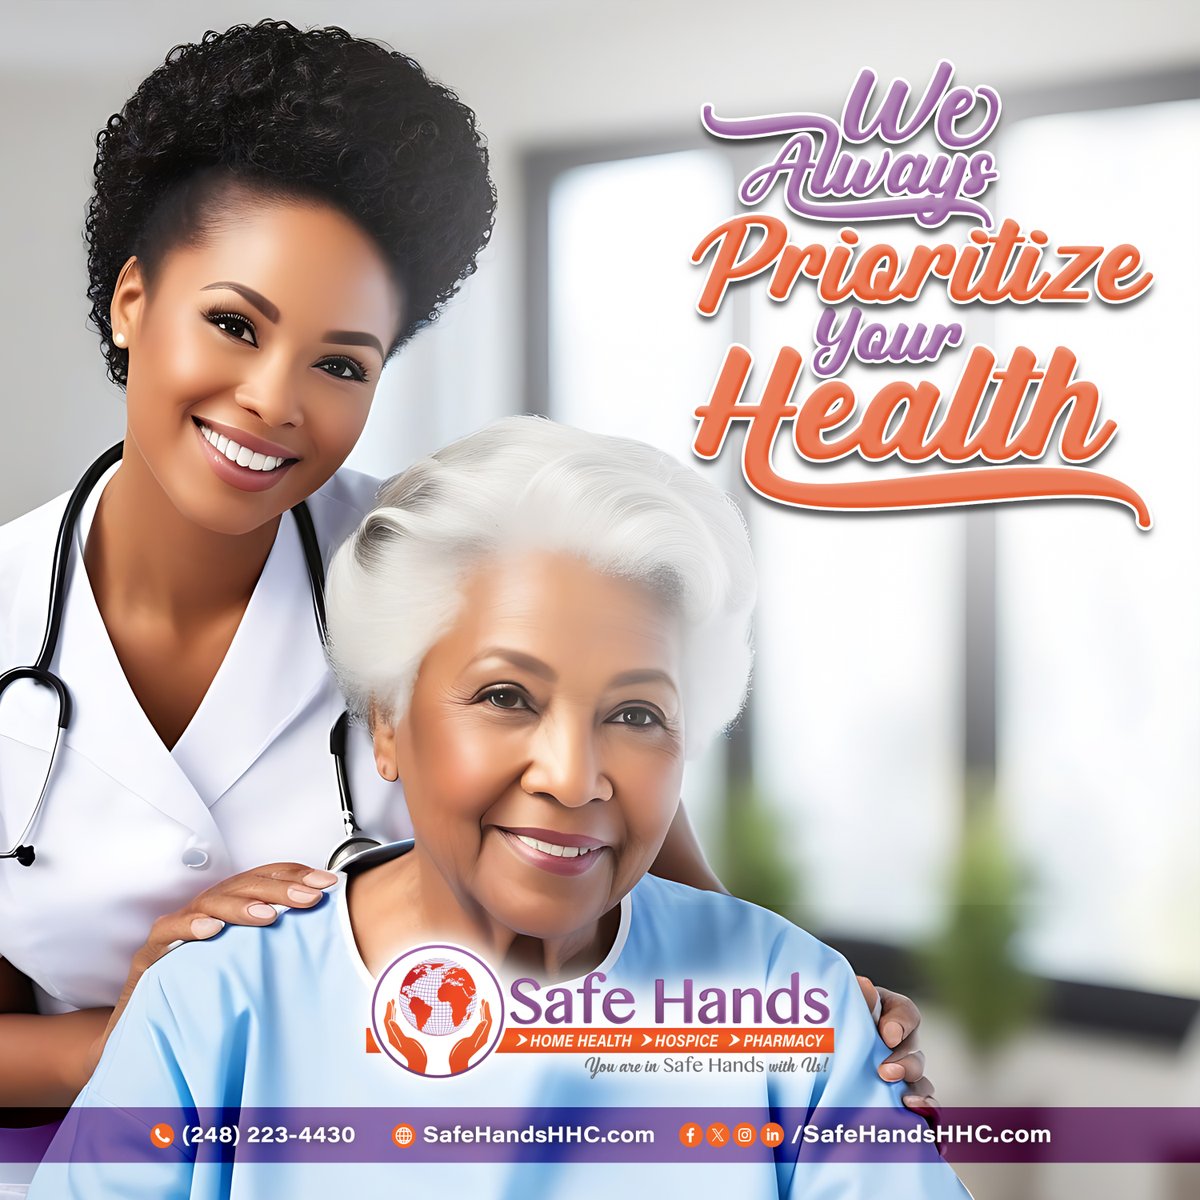 Wondering where to find the treatment you need & the care you deserve? Safe Hands is here, providing patient-centered care with kindness and expertise.

Feel free to contact us now: +1 (248) 223-4430
or
Visit us: safehandshhc.com
#SafeHandsHHC #HealthcareHeroes #SeniorCare